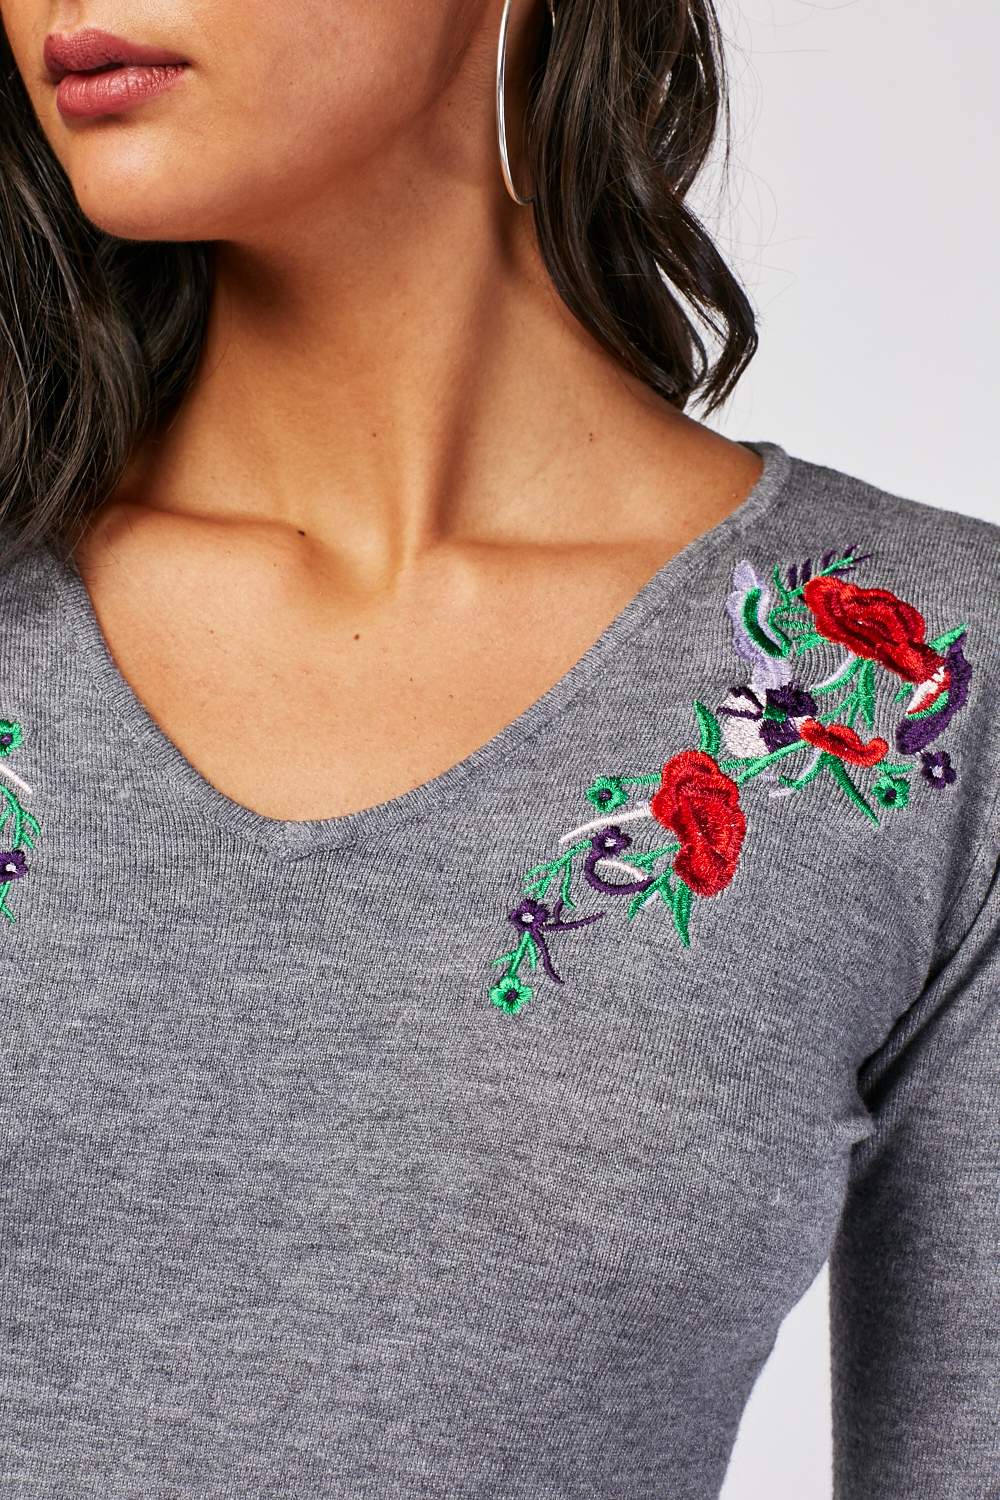 Ada E. Silva: Top 15+ Lessons About Knit Sweater With Floral Embroidery ...